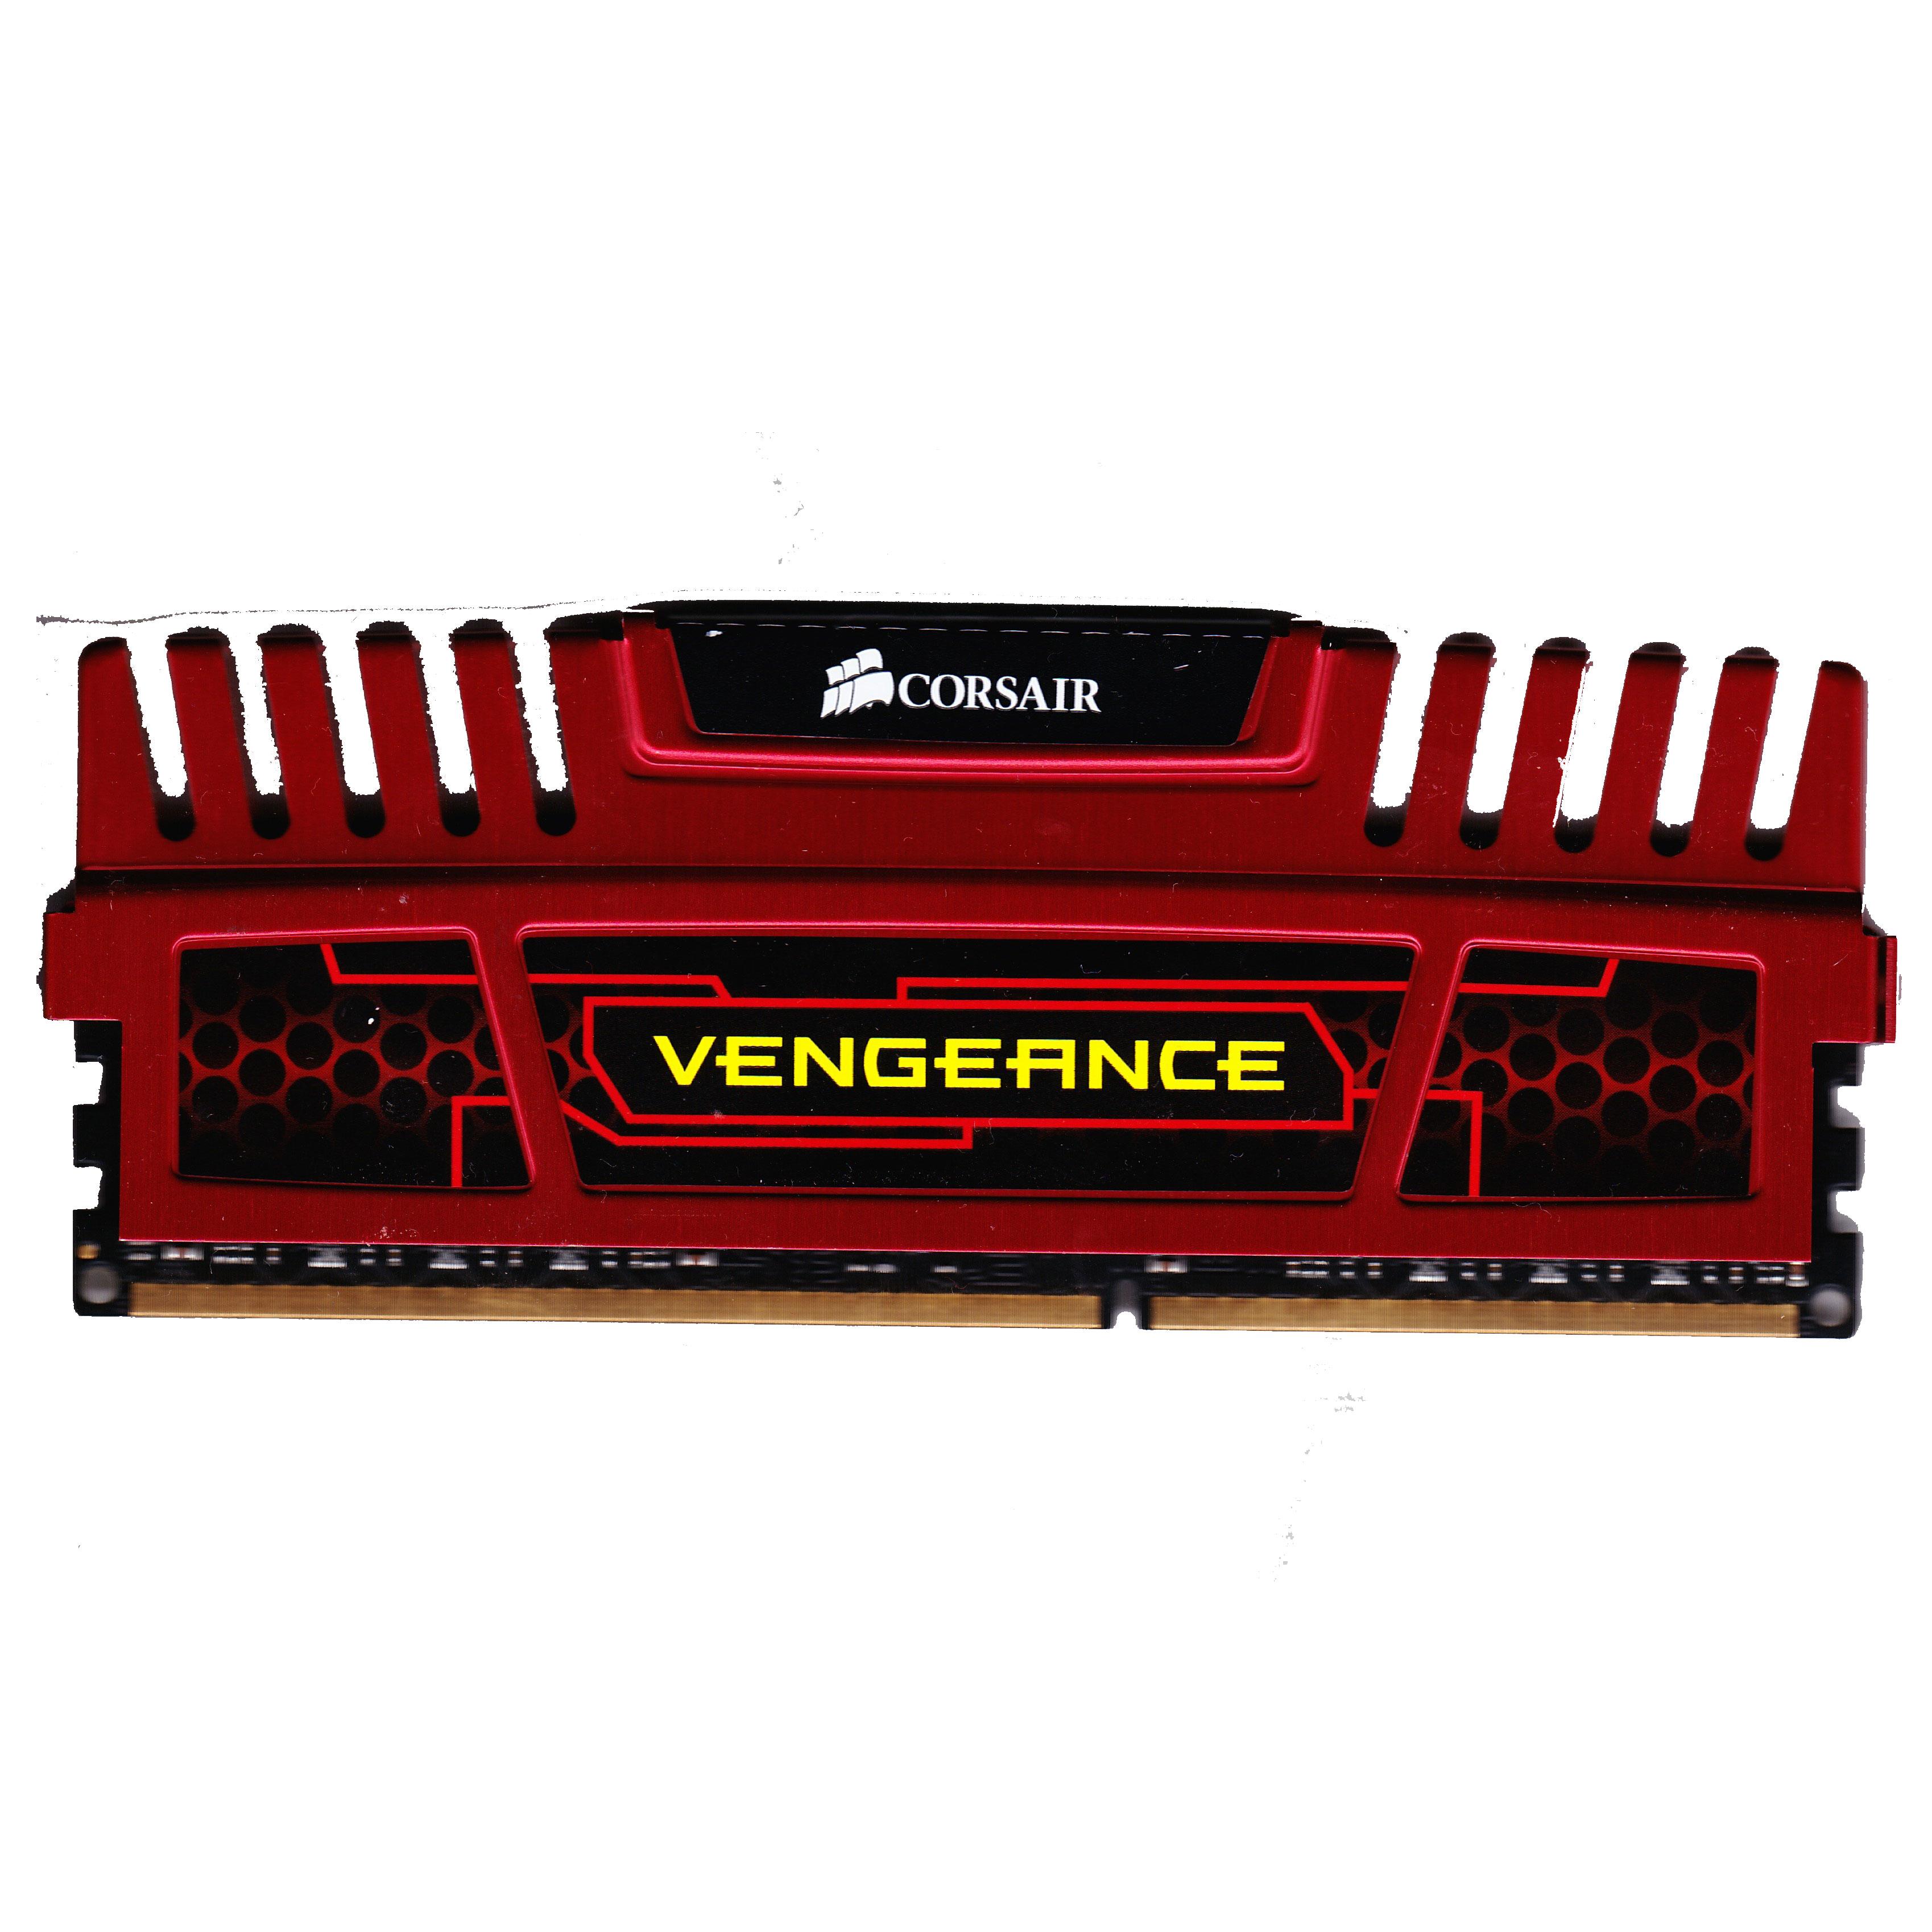  CORSAIR Vengeance 4096MB DDR4 532503 13601627 - Tested and New